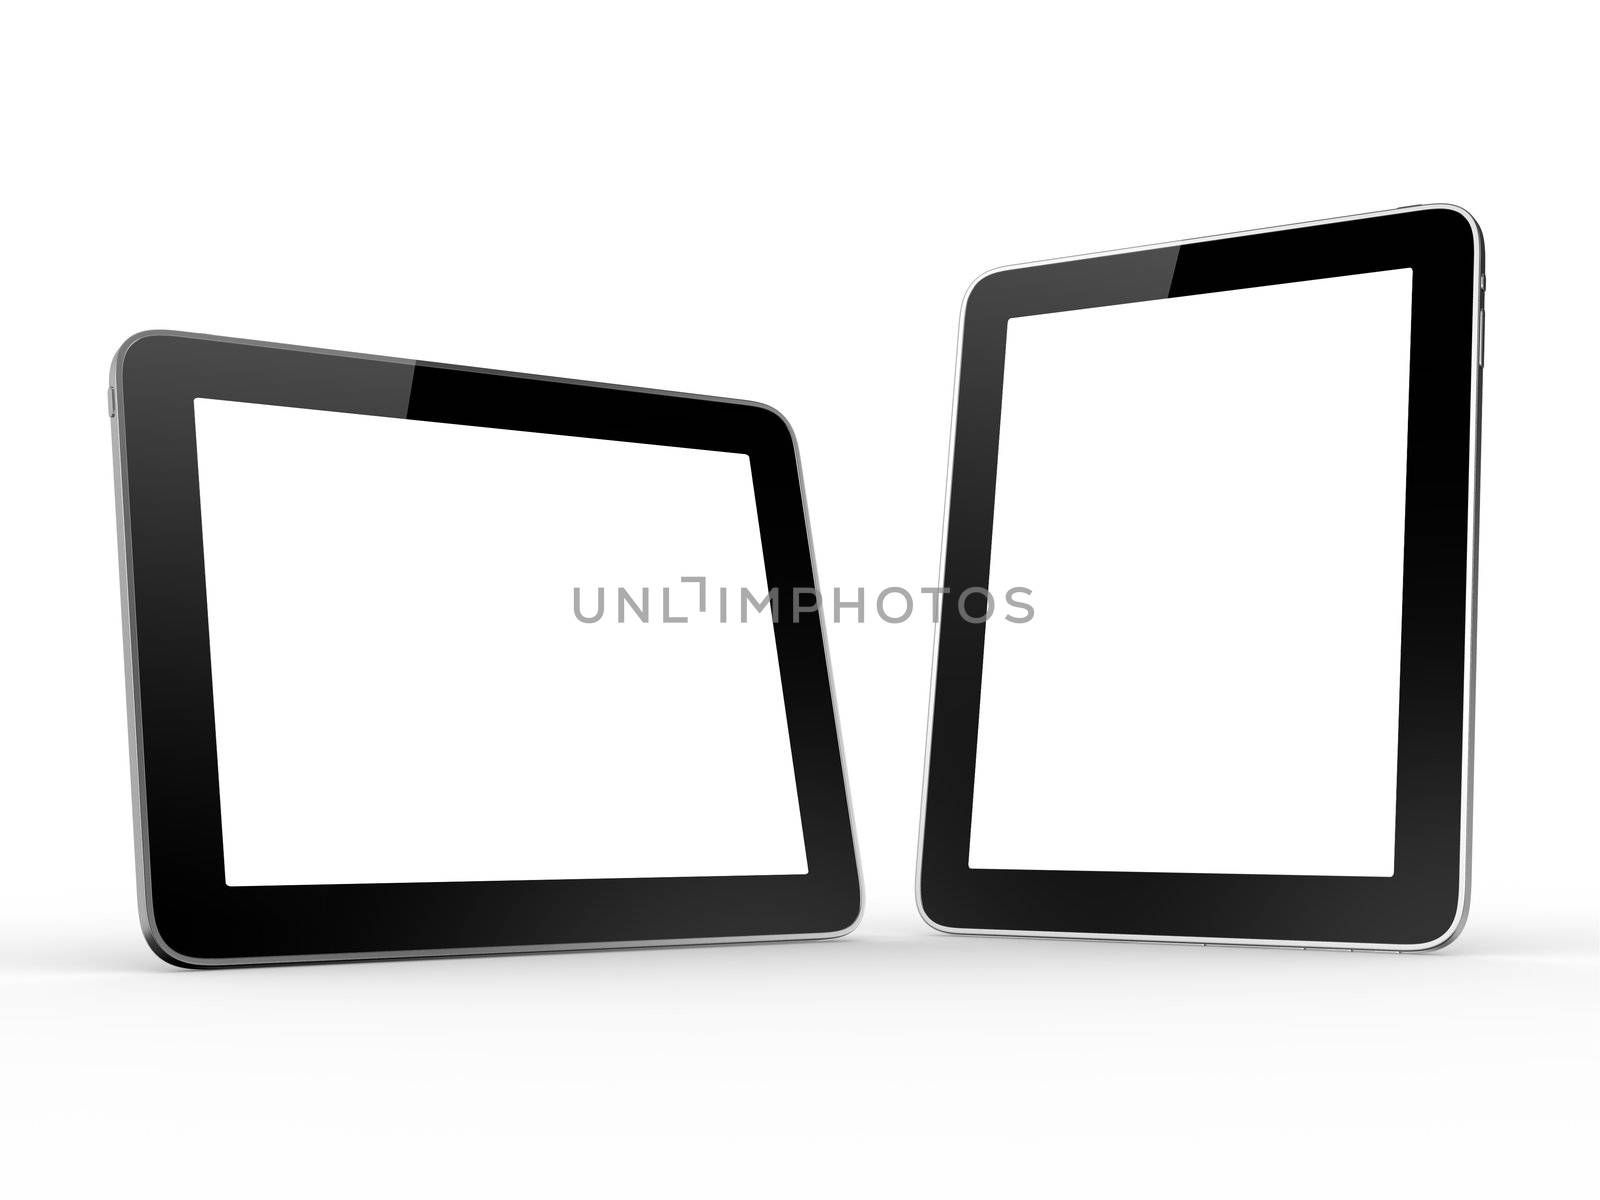 Realistic touch screen tablet computers isolated on white background. Modern touch pad device with blank screen and black frame.